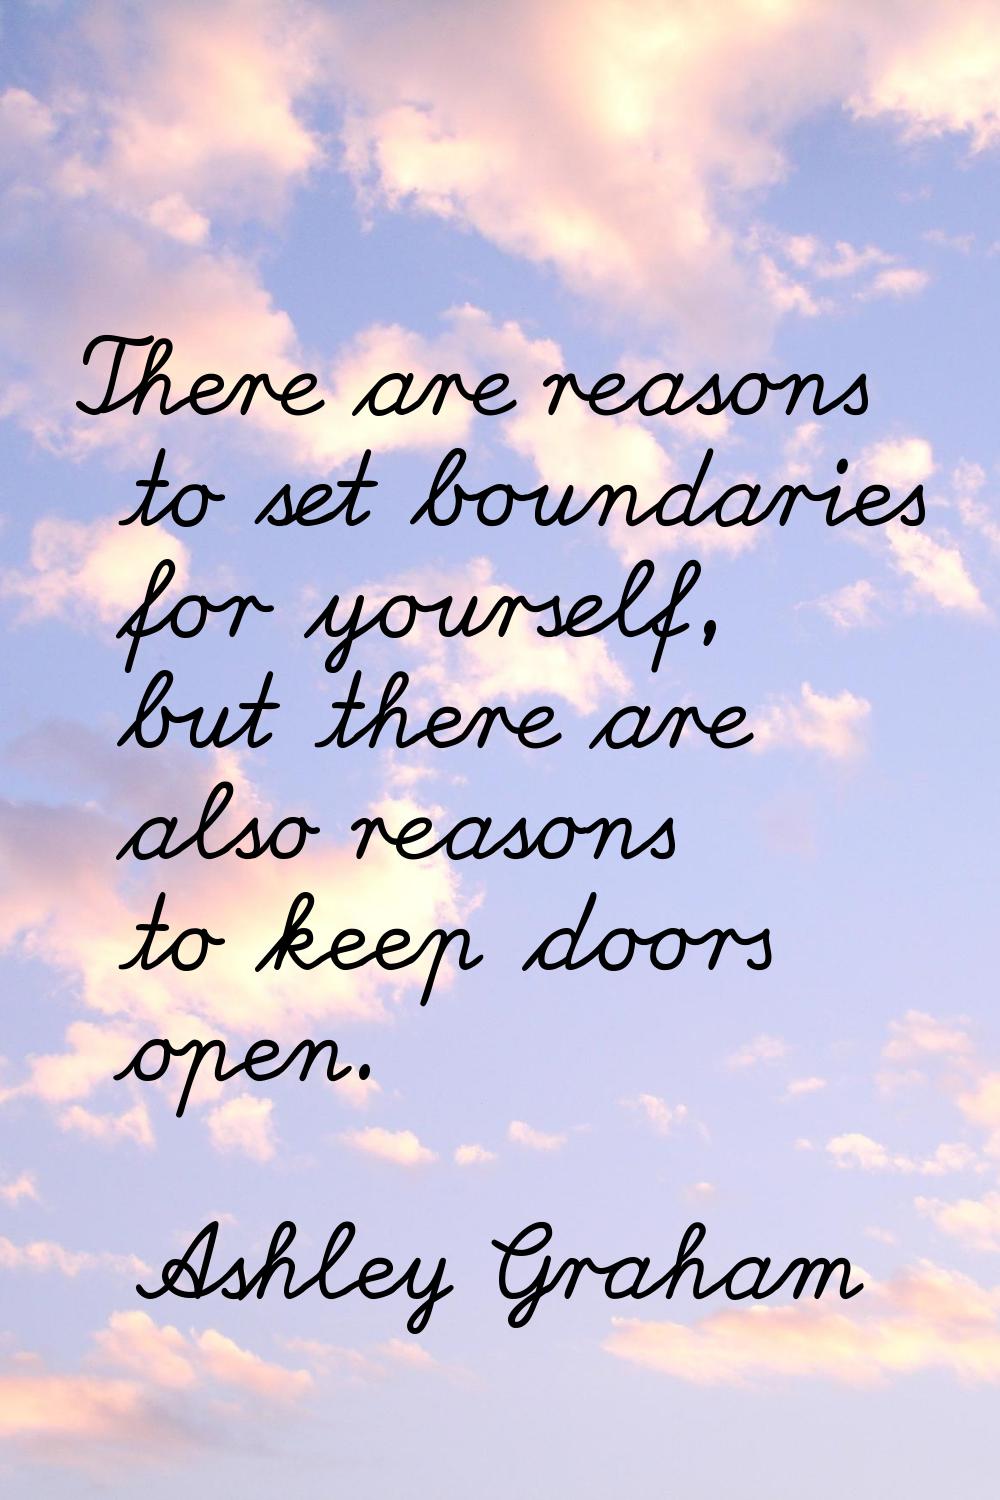 There are reasons to set boundaries for yourself, but there are also reasons to keep doors open.